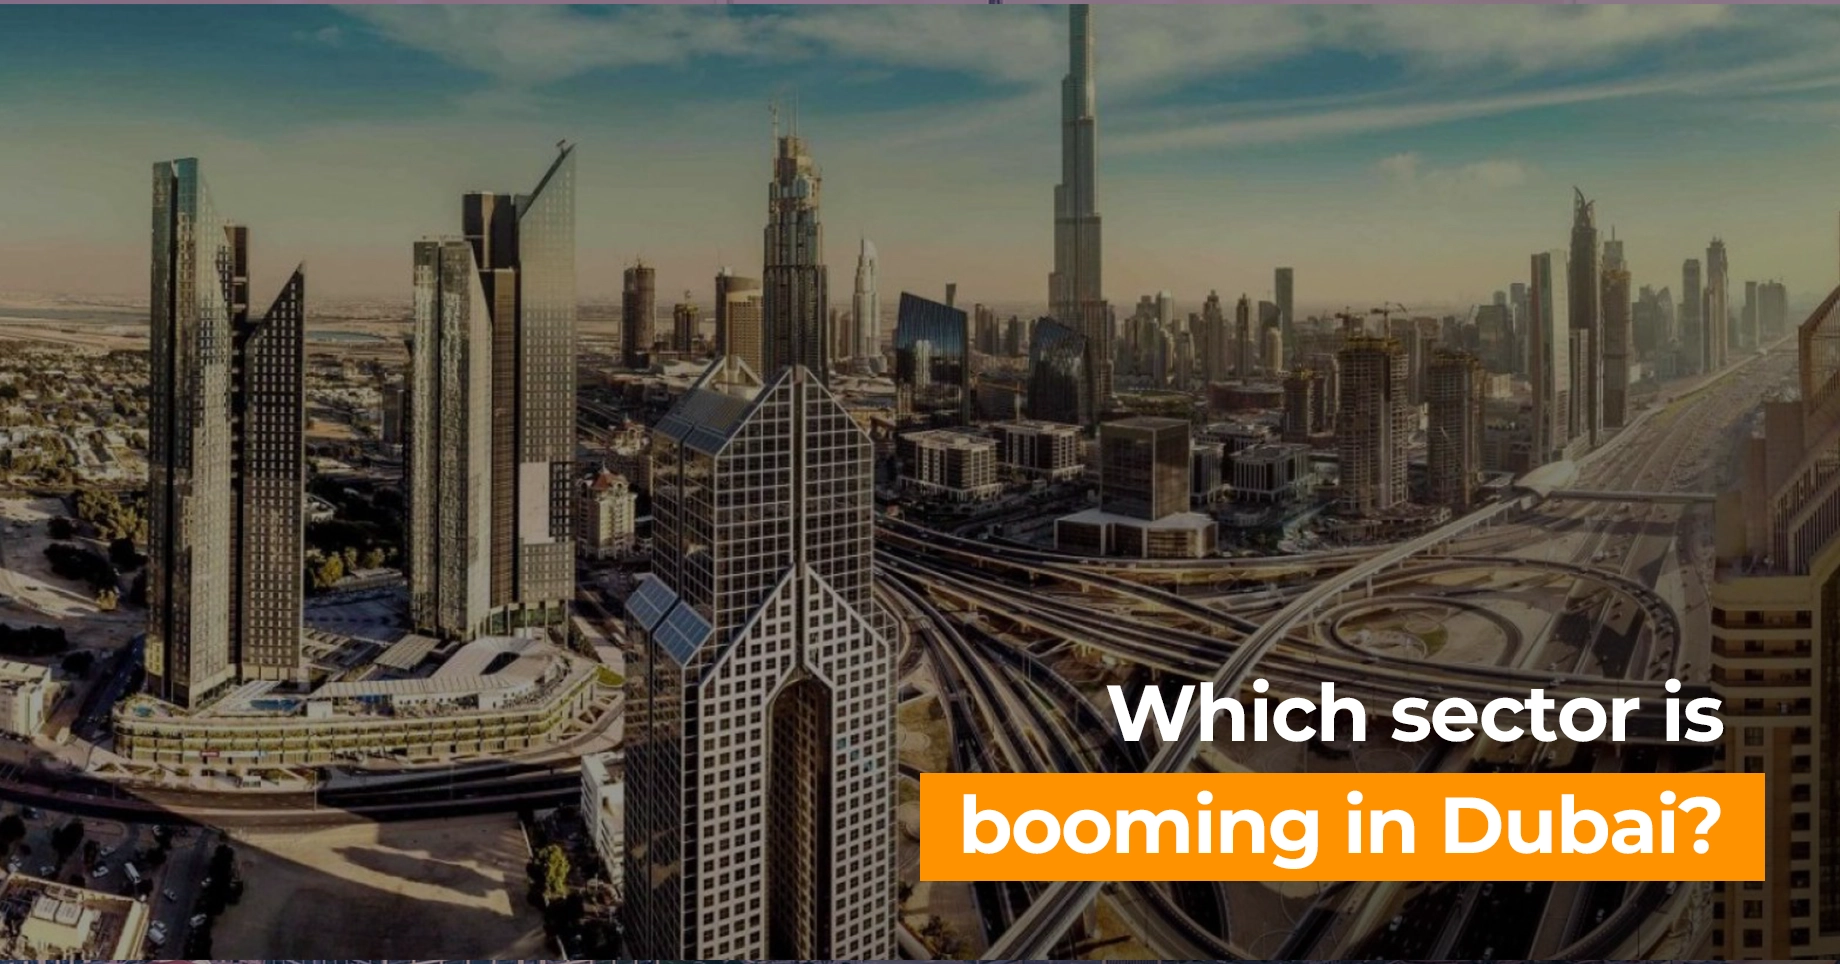 Which sector is booming in Dubai?